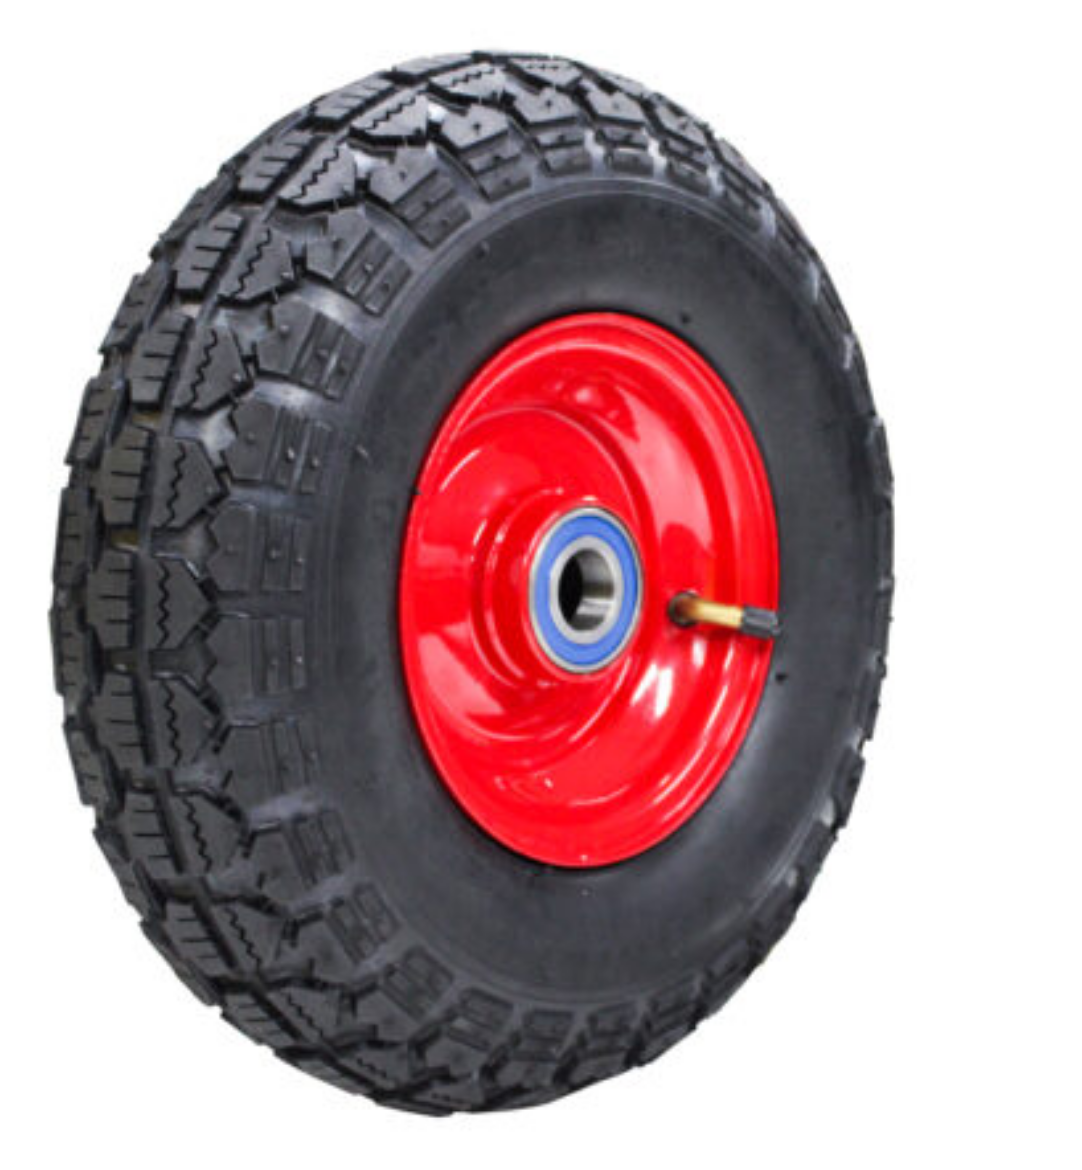 Picture of 320mm Steel Centred Pneumatic Wheel | 1 Axle Diameter (PN1271-1FL)